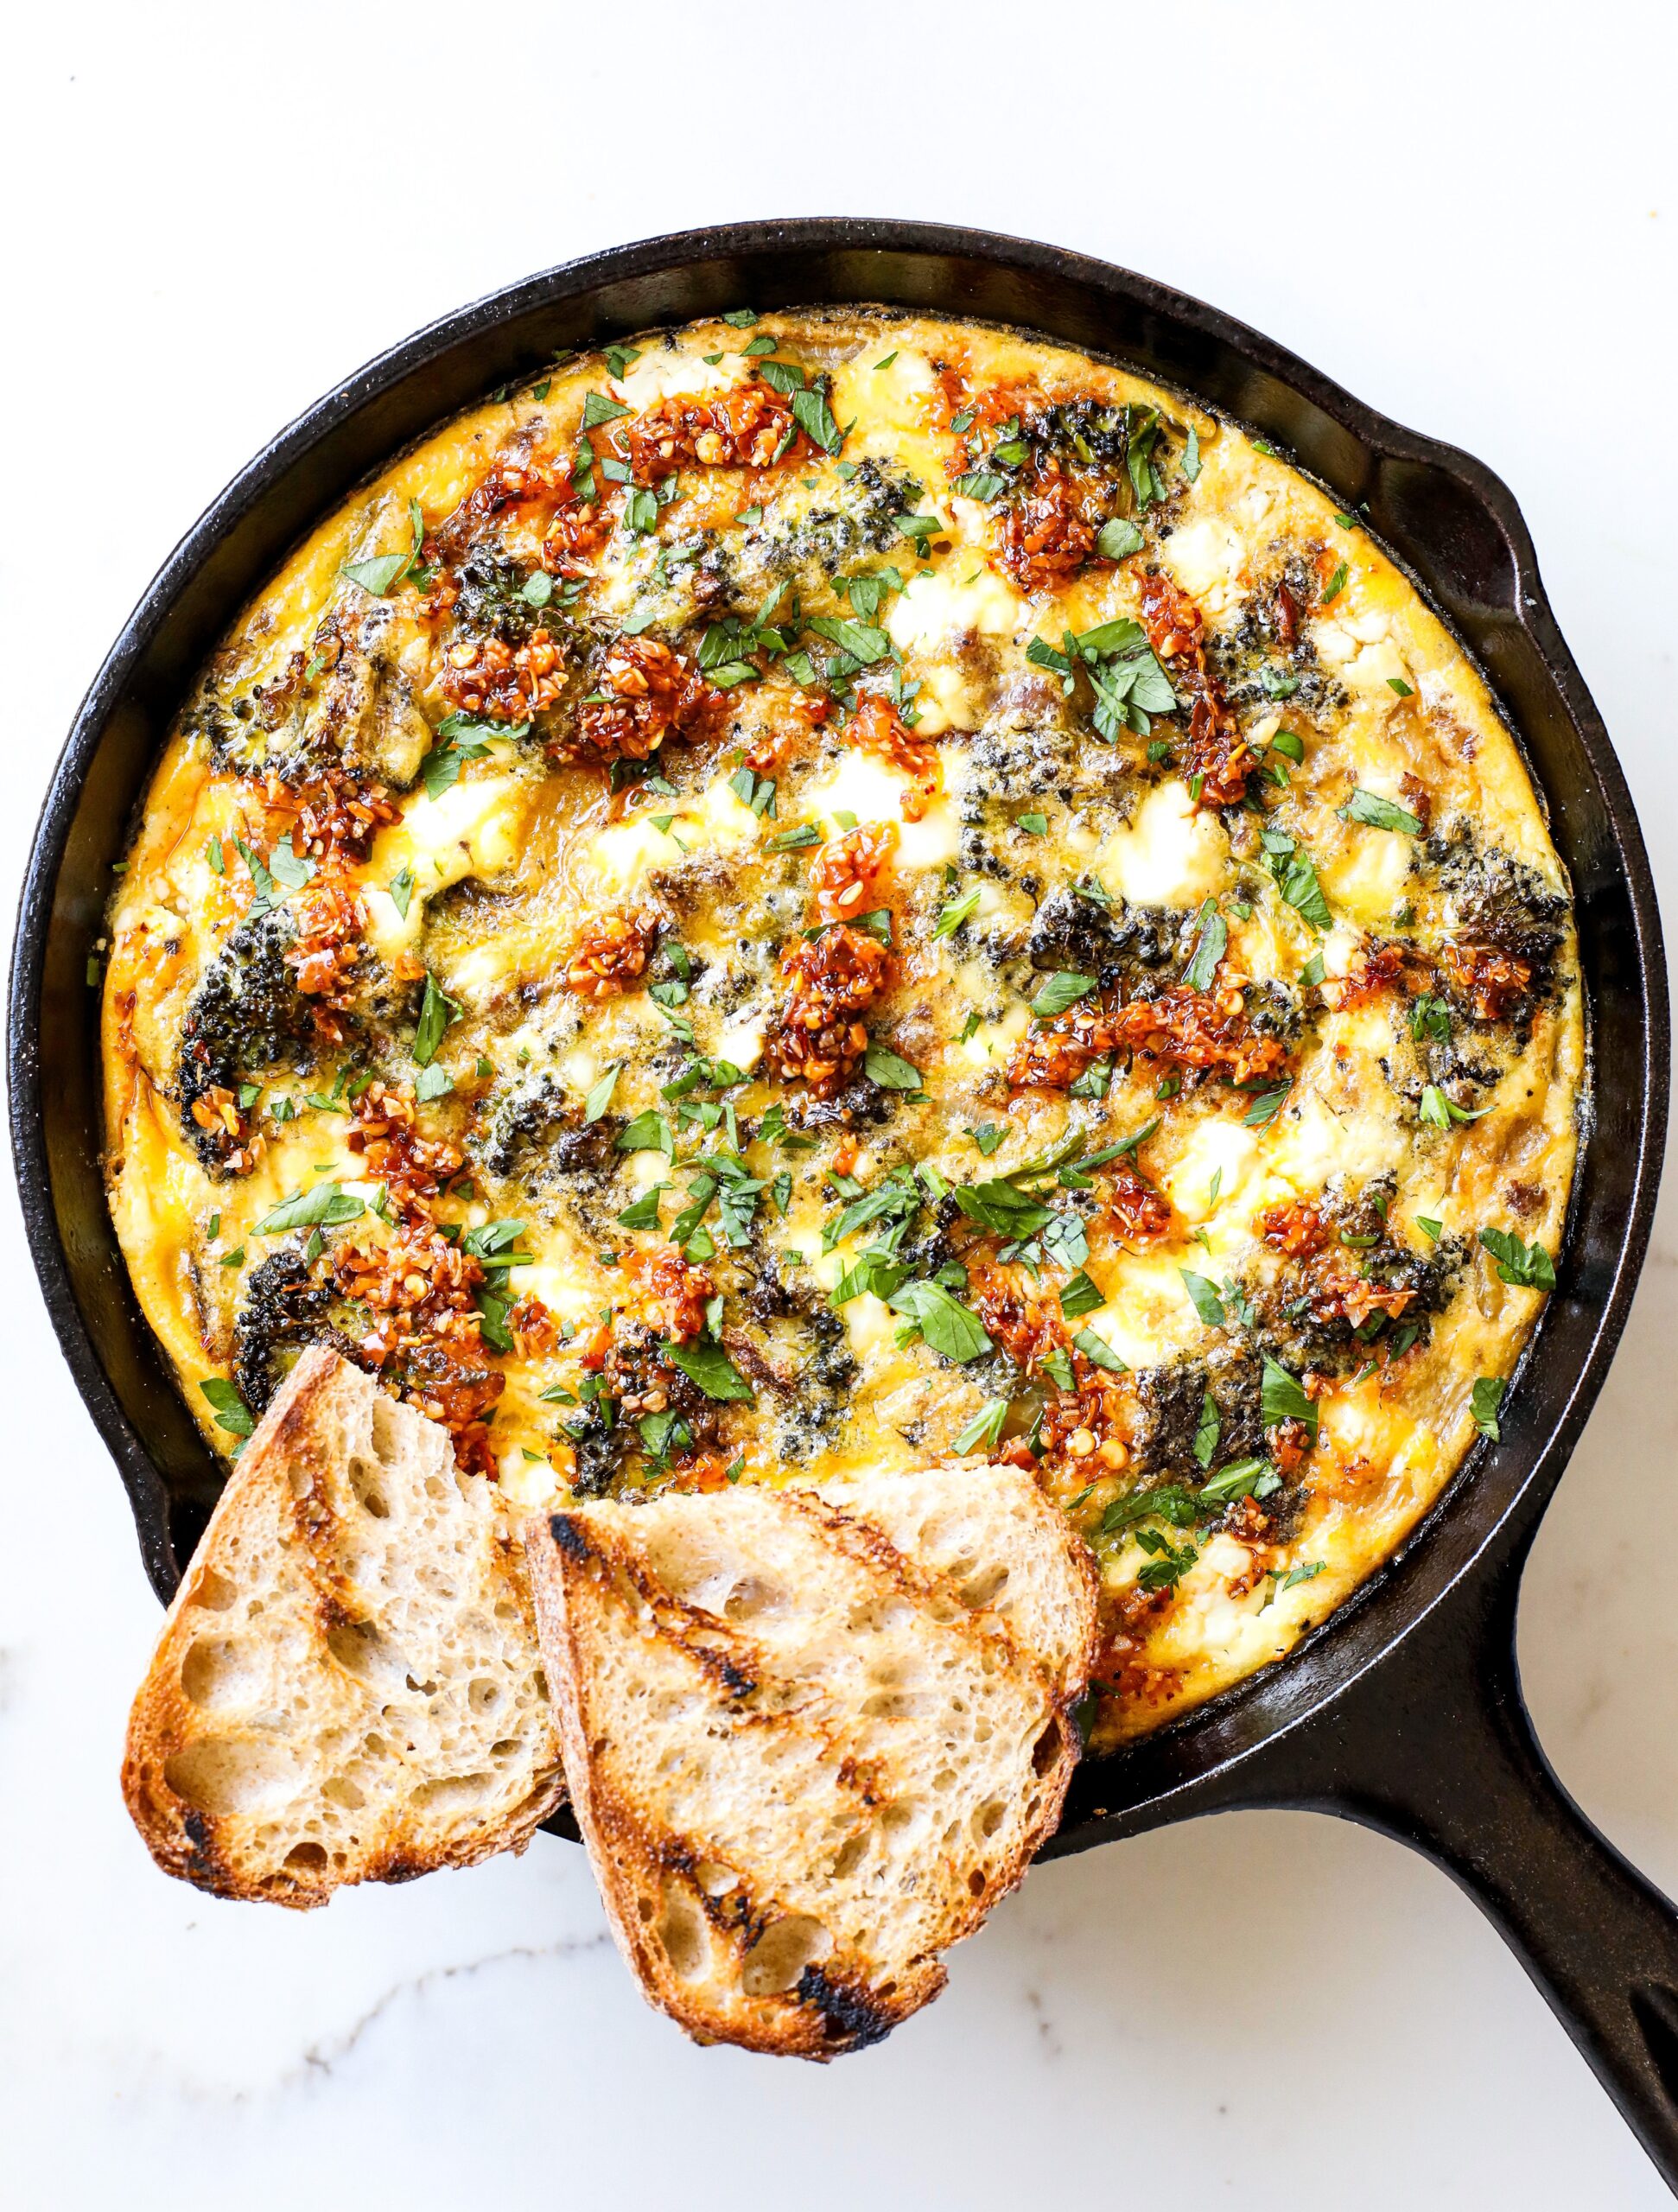 Roasted Broccoli, Sausage, and Goat Cheese Frittata